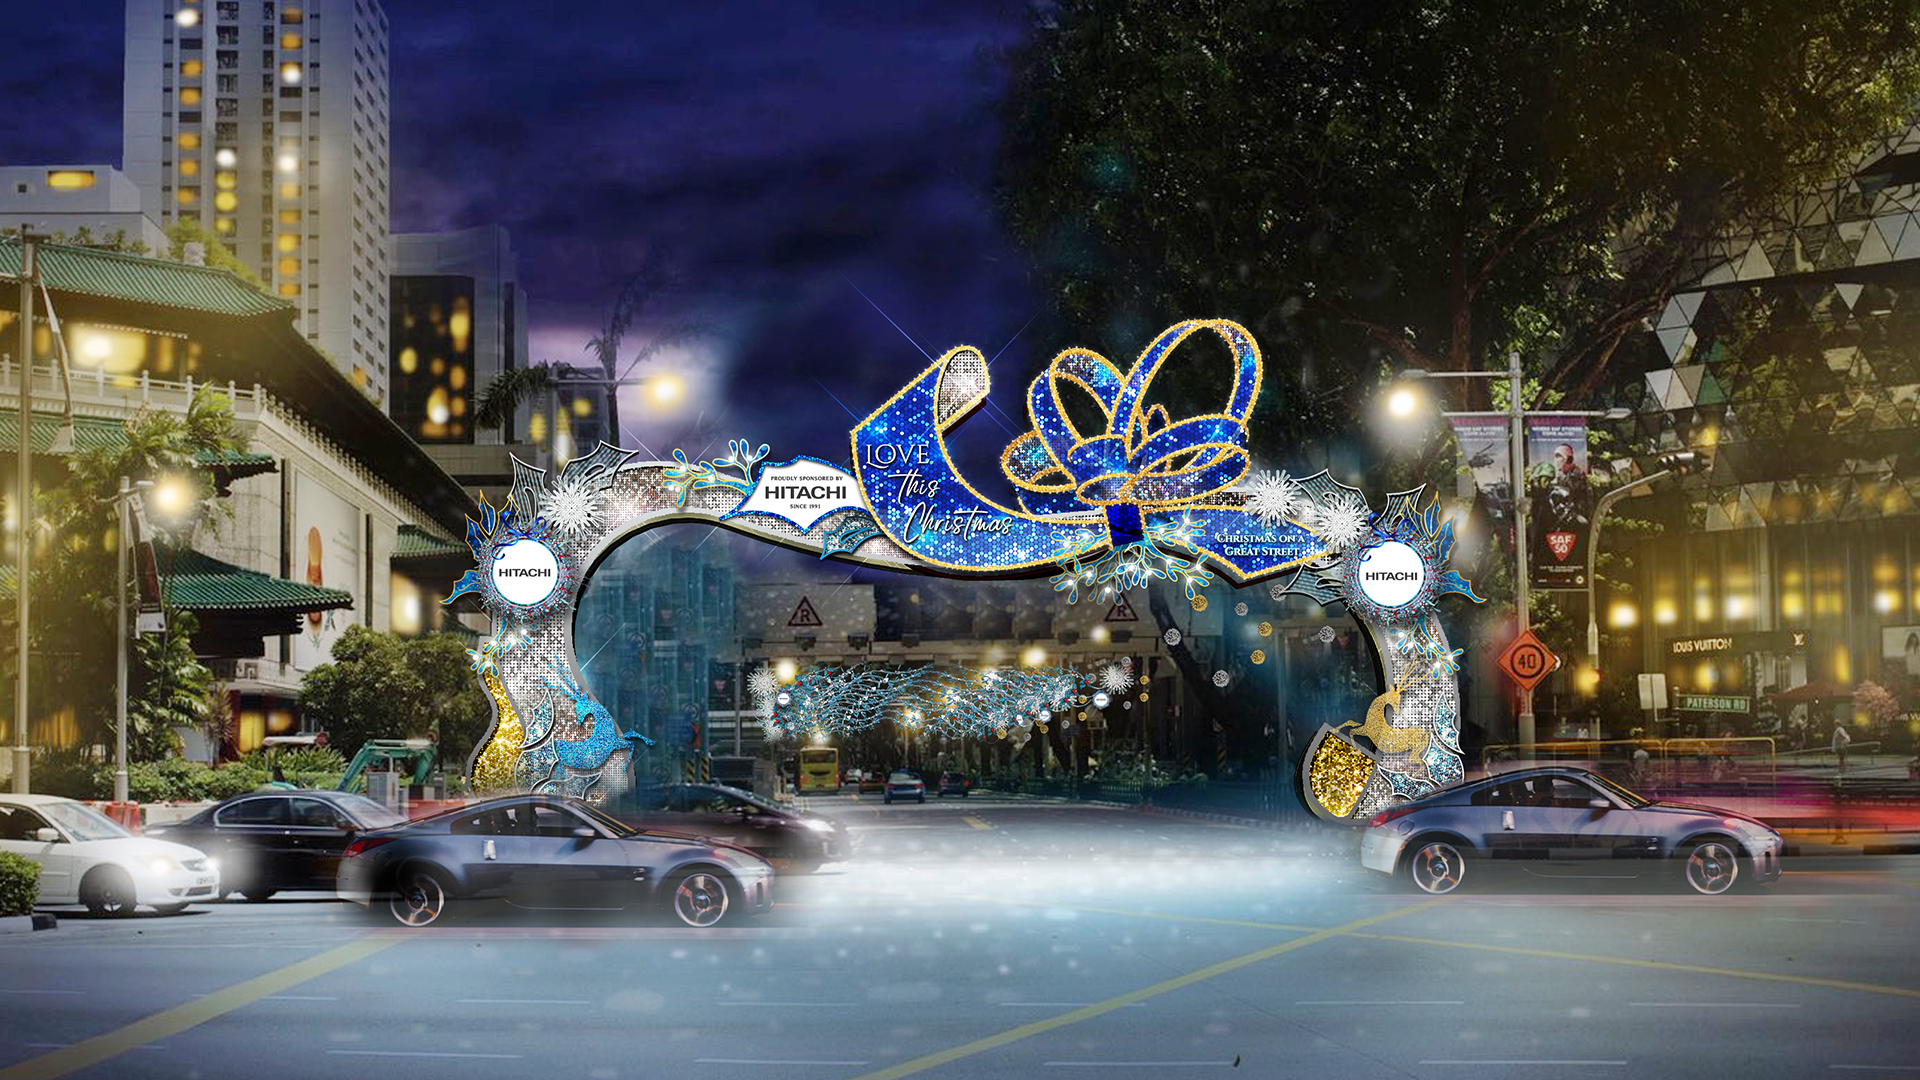 Orchard Road Christmas Lights To Go Up On 13 Nov, Will Have Virtual